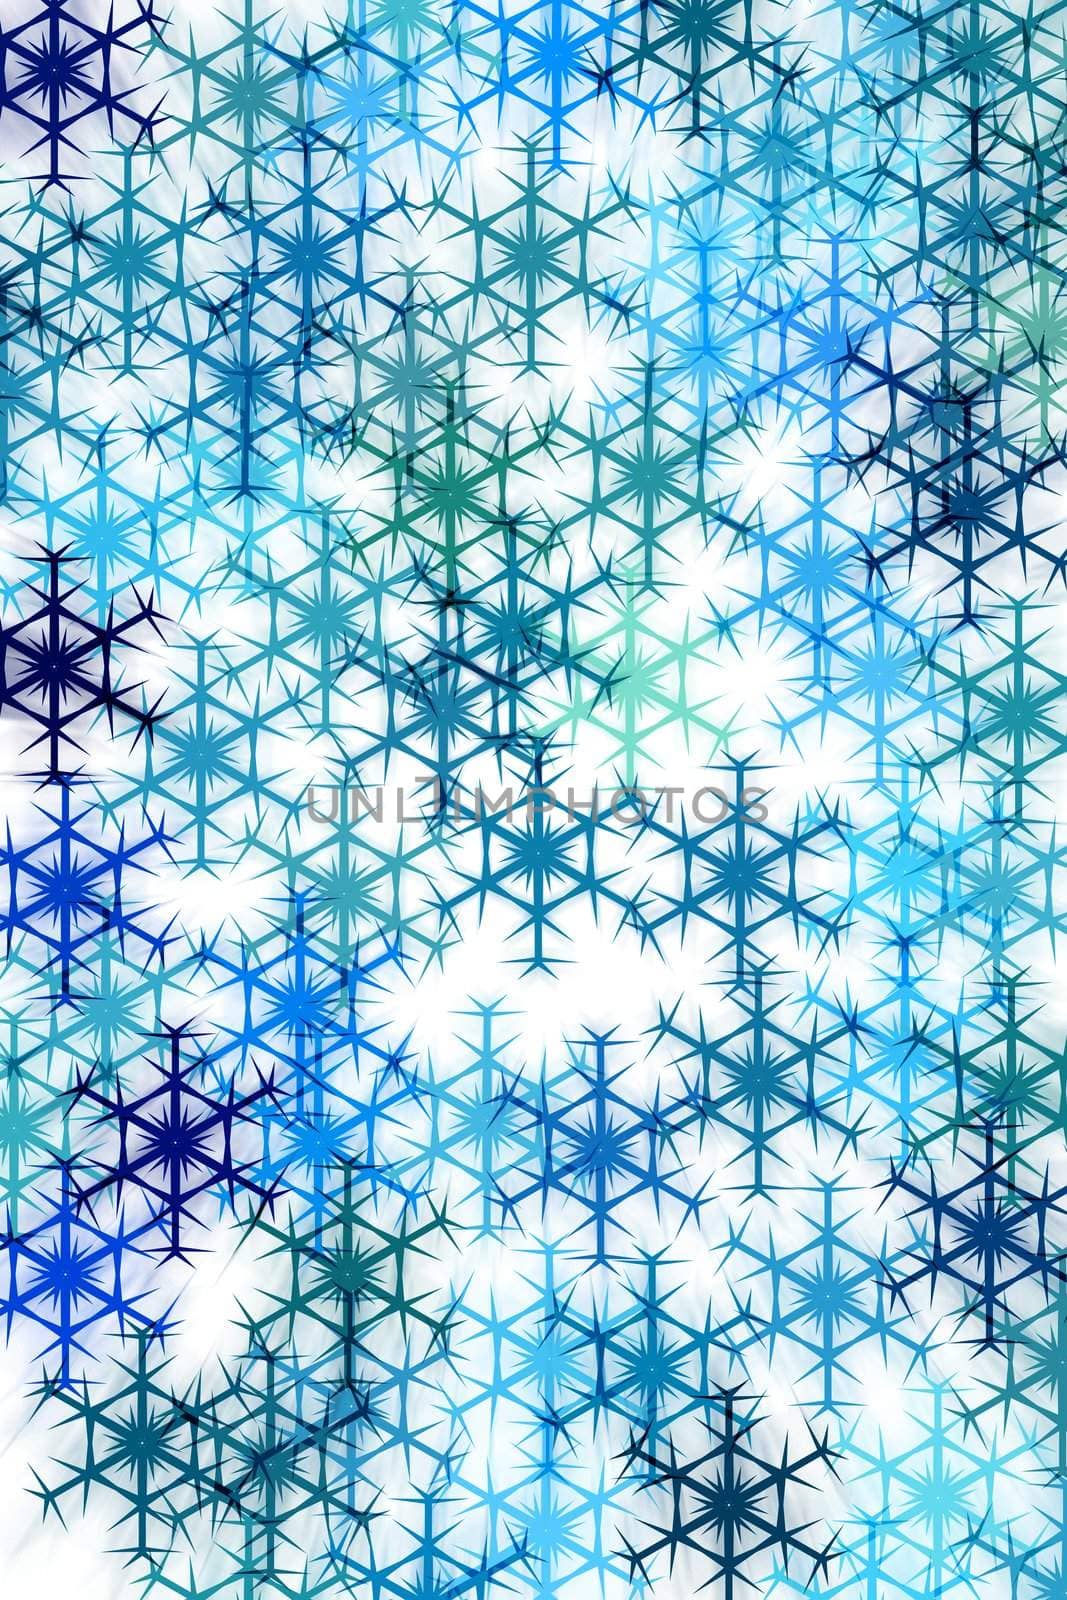 snowflakes in different blue colours on white background